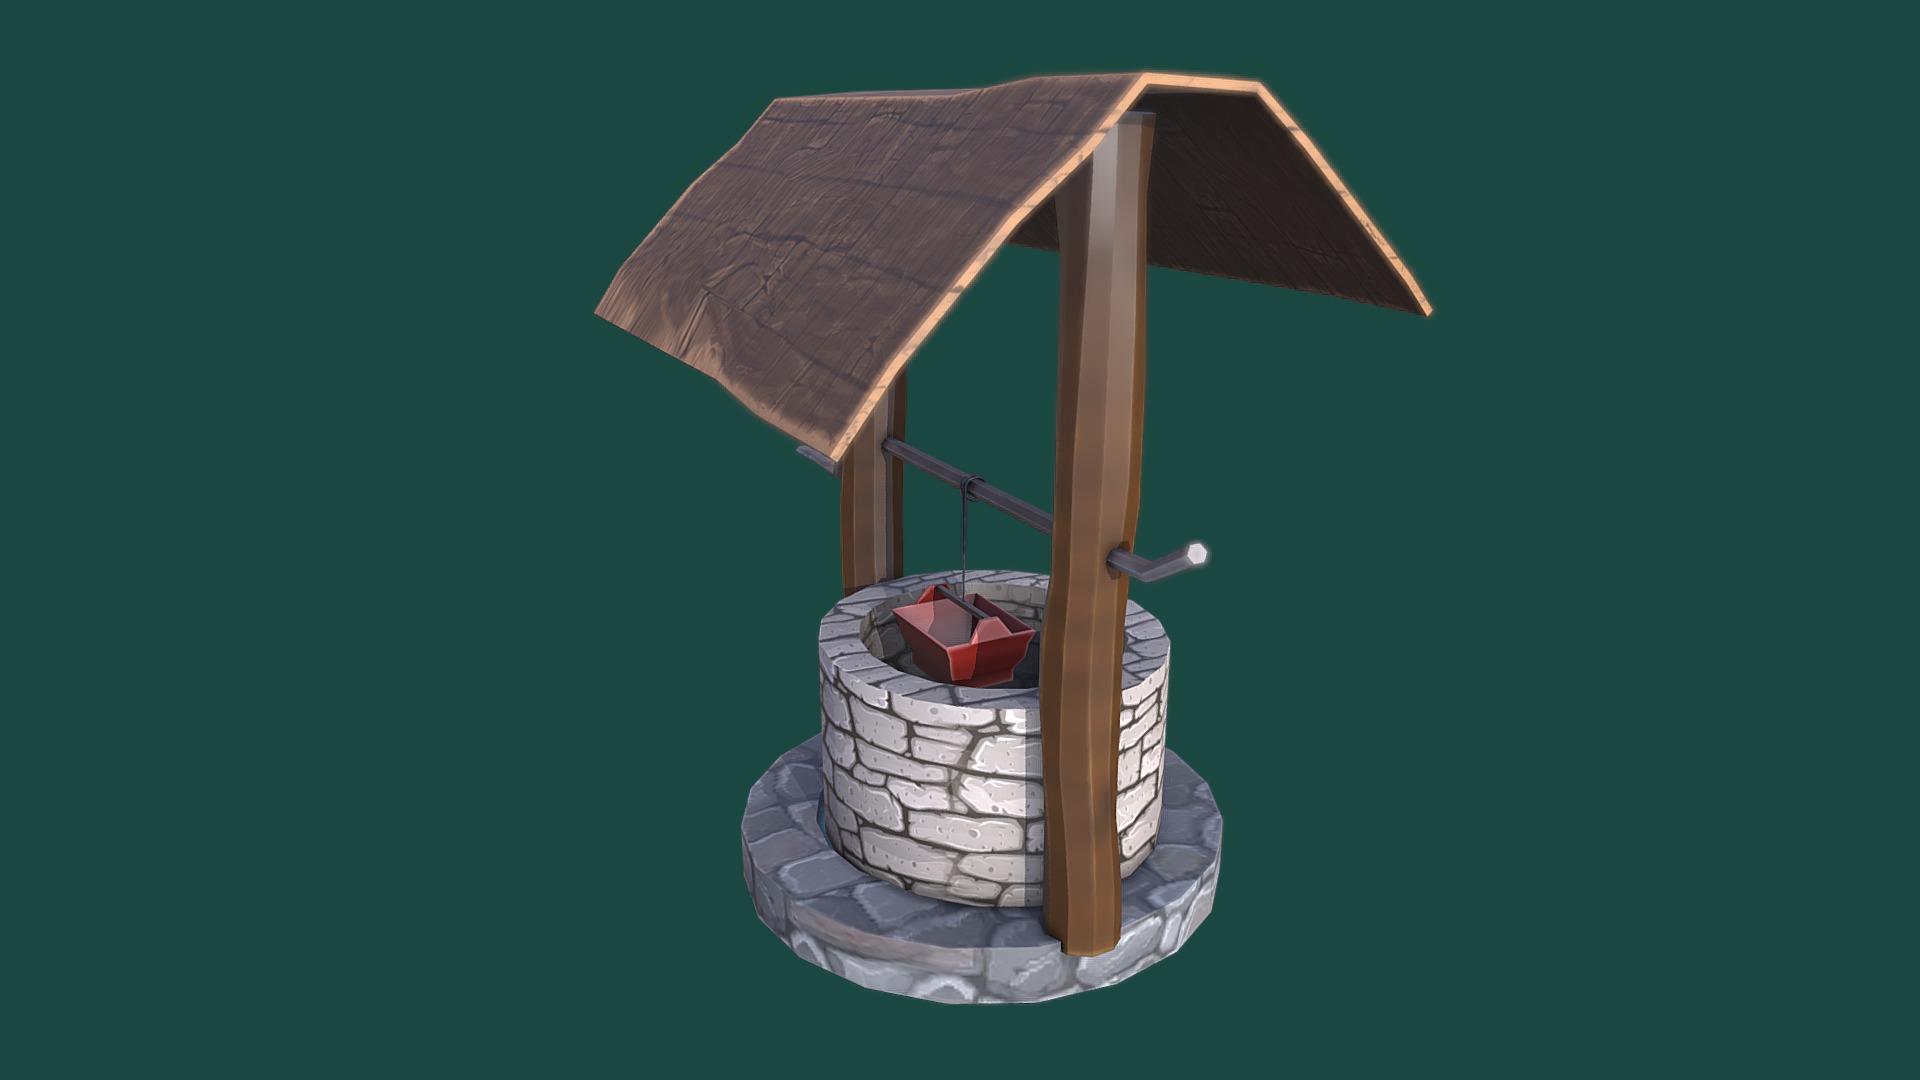 3D model low poly well - This is a 3D model of the low poly well. The 3D model is about a birdhouse with a bird inside.